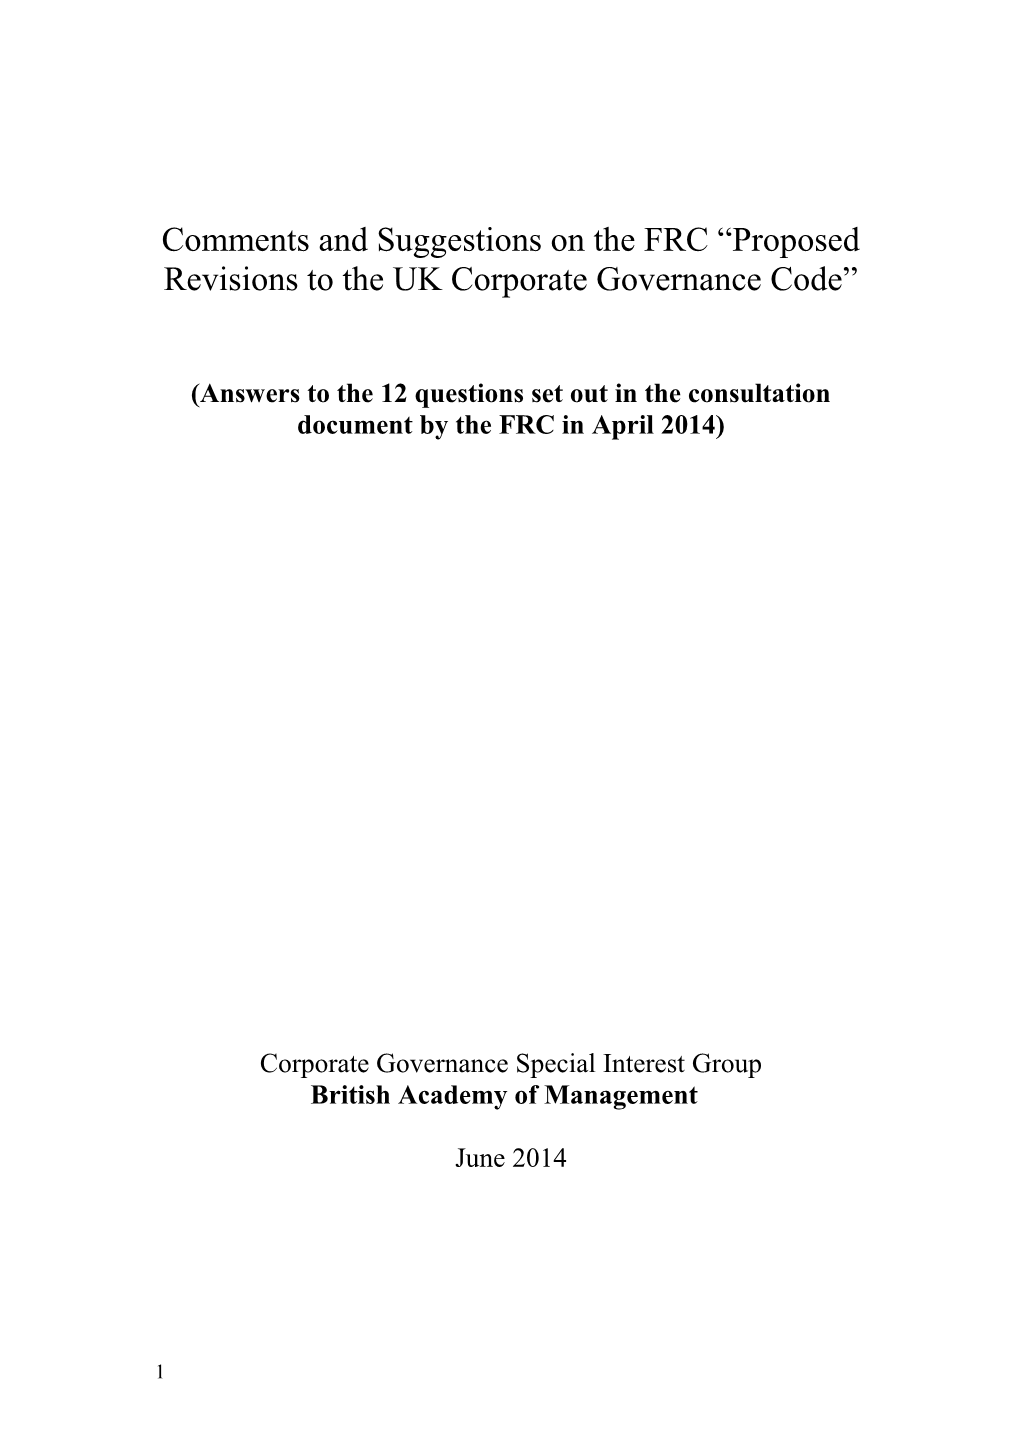 Comments and Suggestions on the FRC Proposed Revisions to Theuk Corporate Governance Code